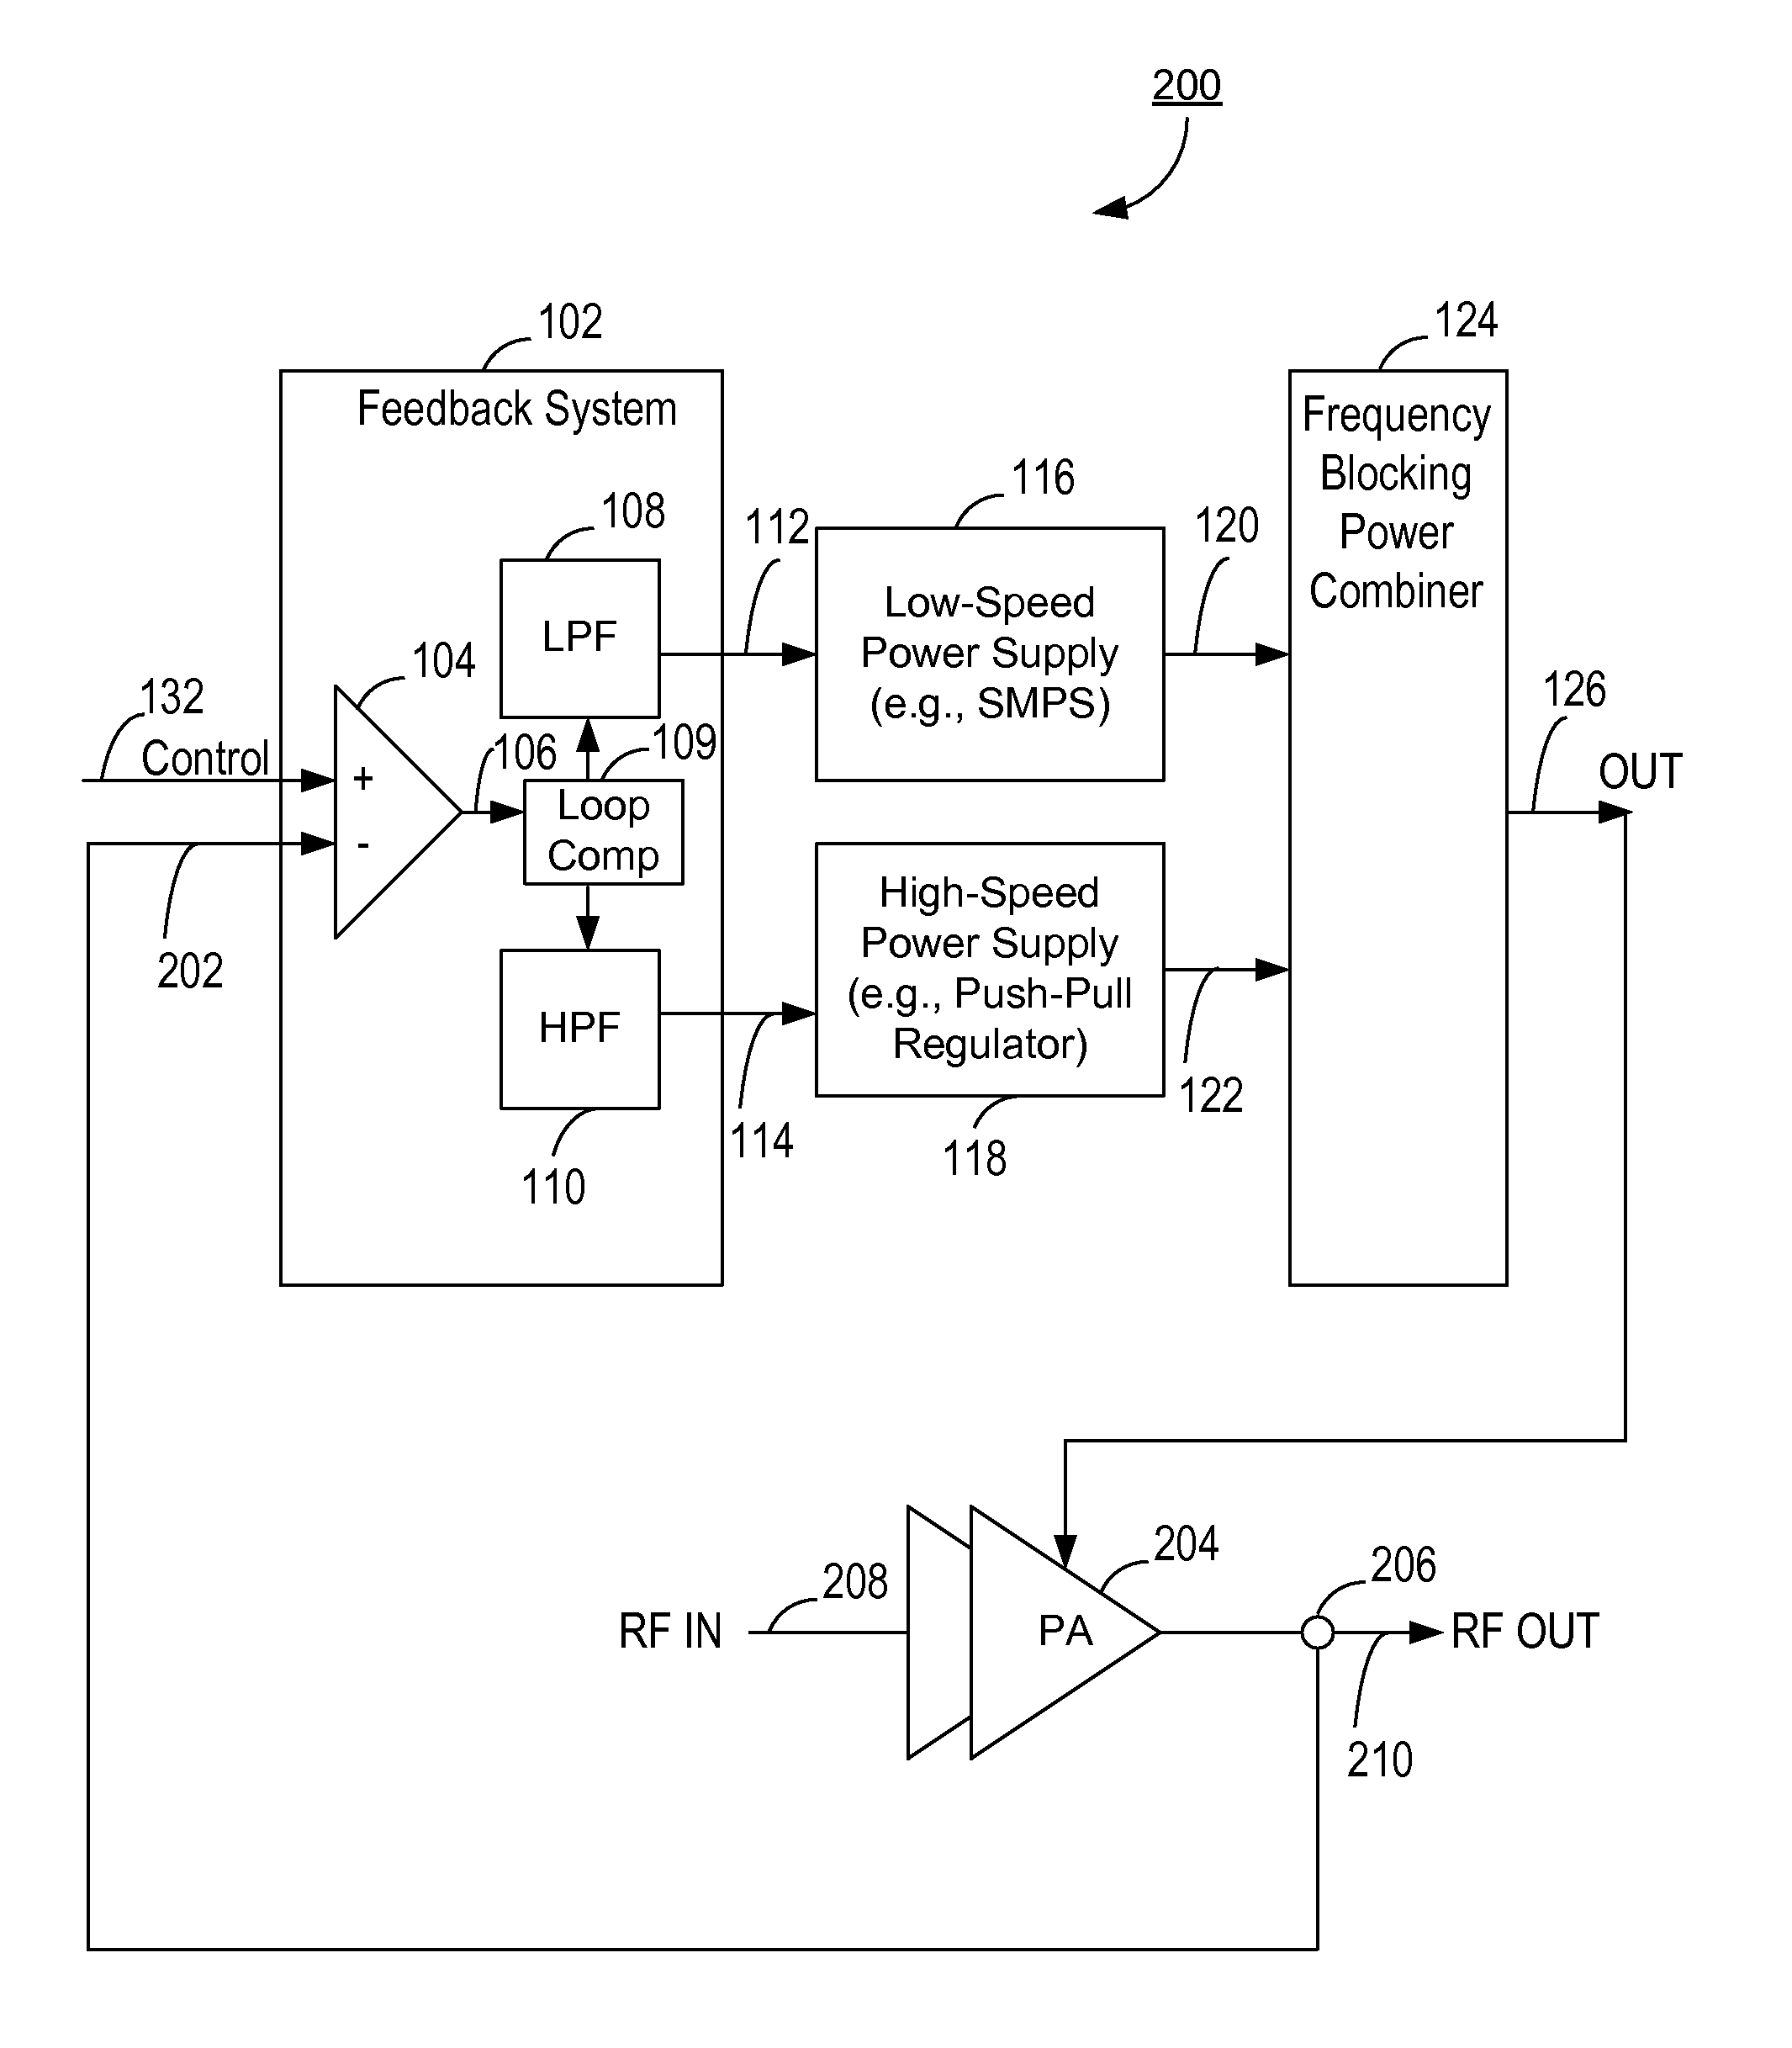 Power combining power supply system